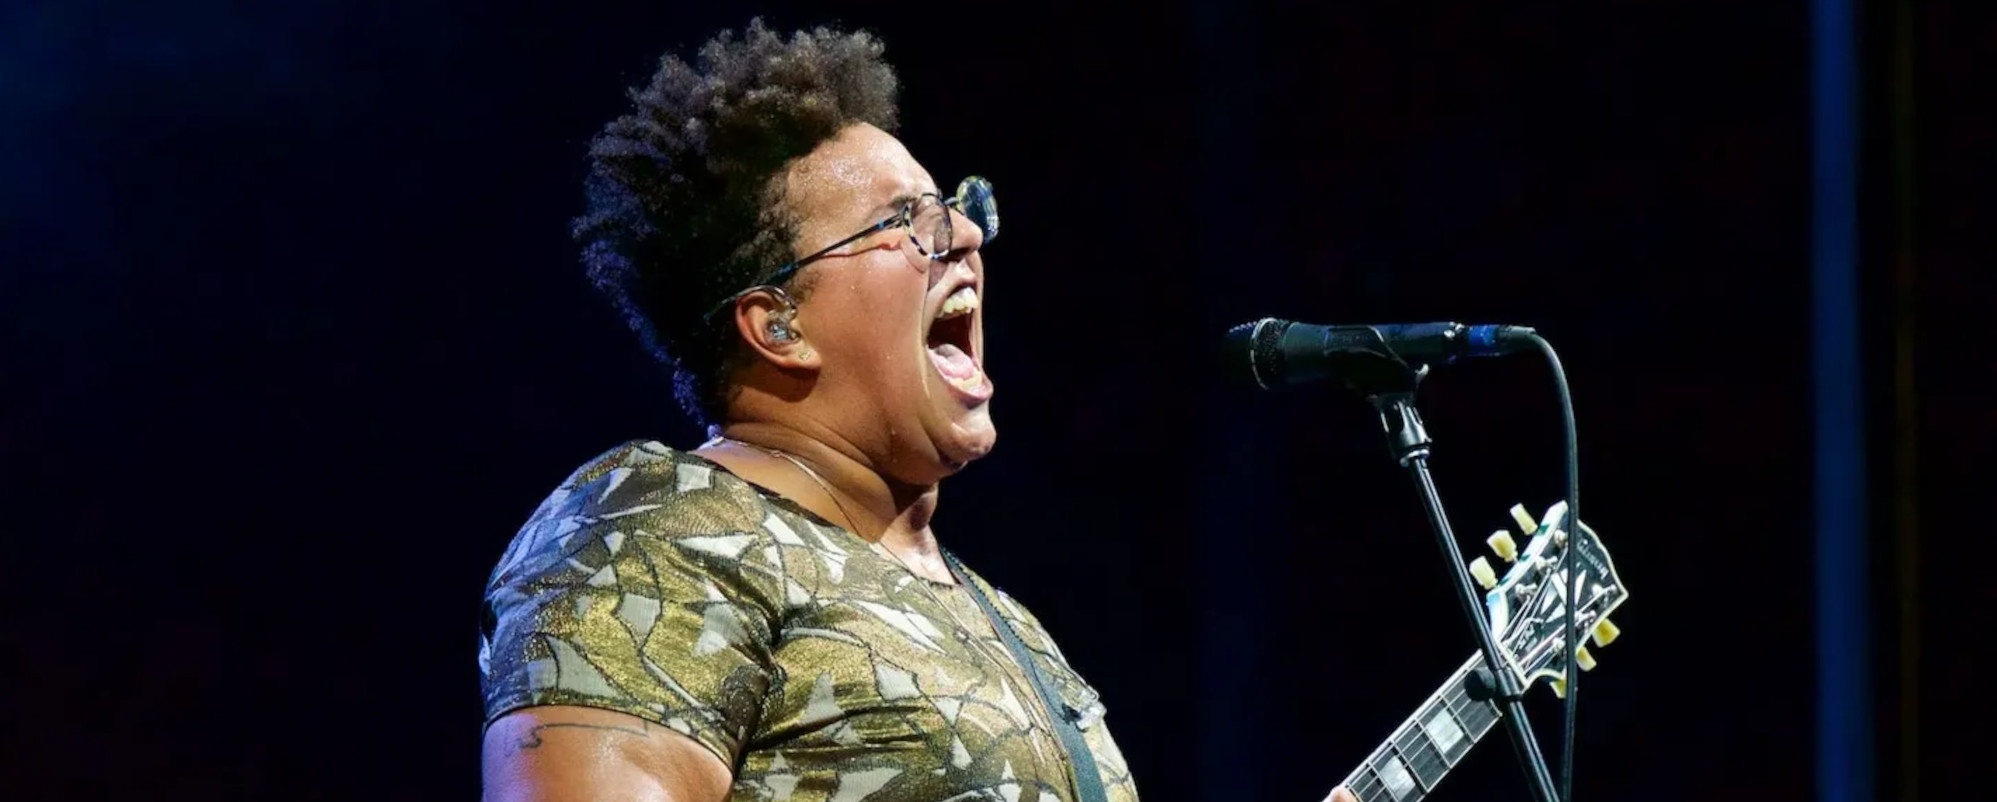 Alabama Shakes Release Deluxe Edition of 2013 Album ‘Sound & Color,’ and New Song “Someday”